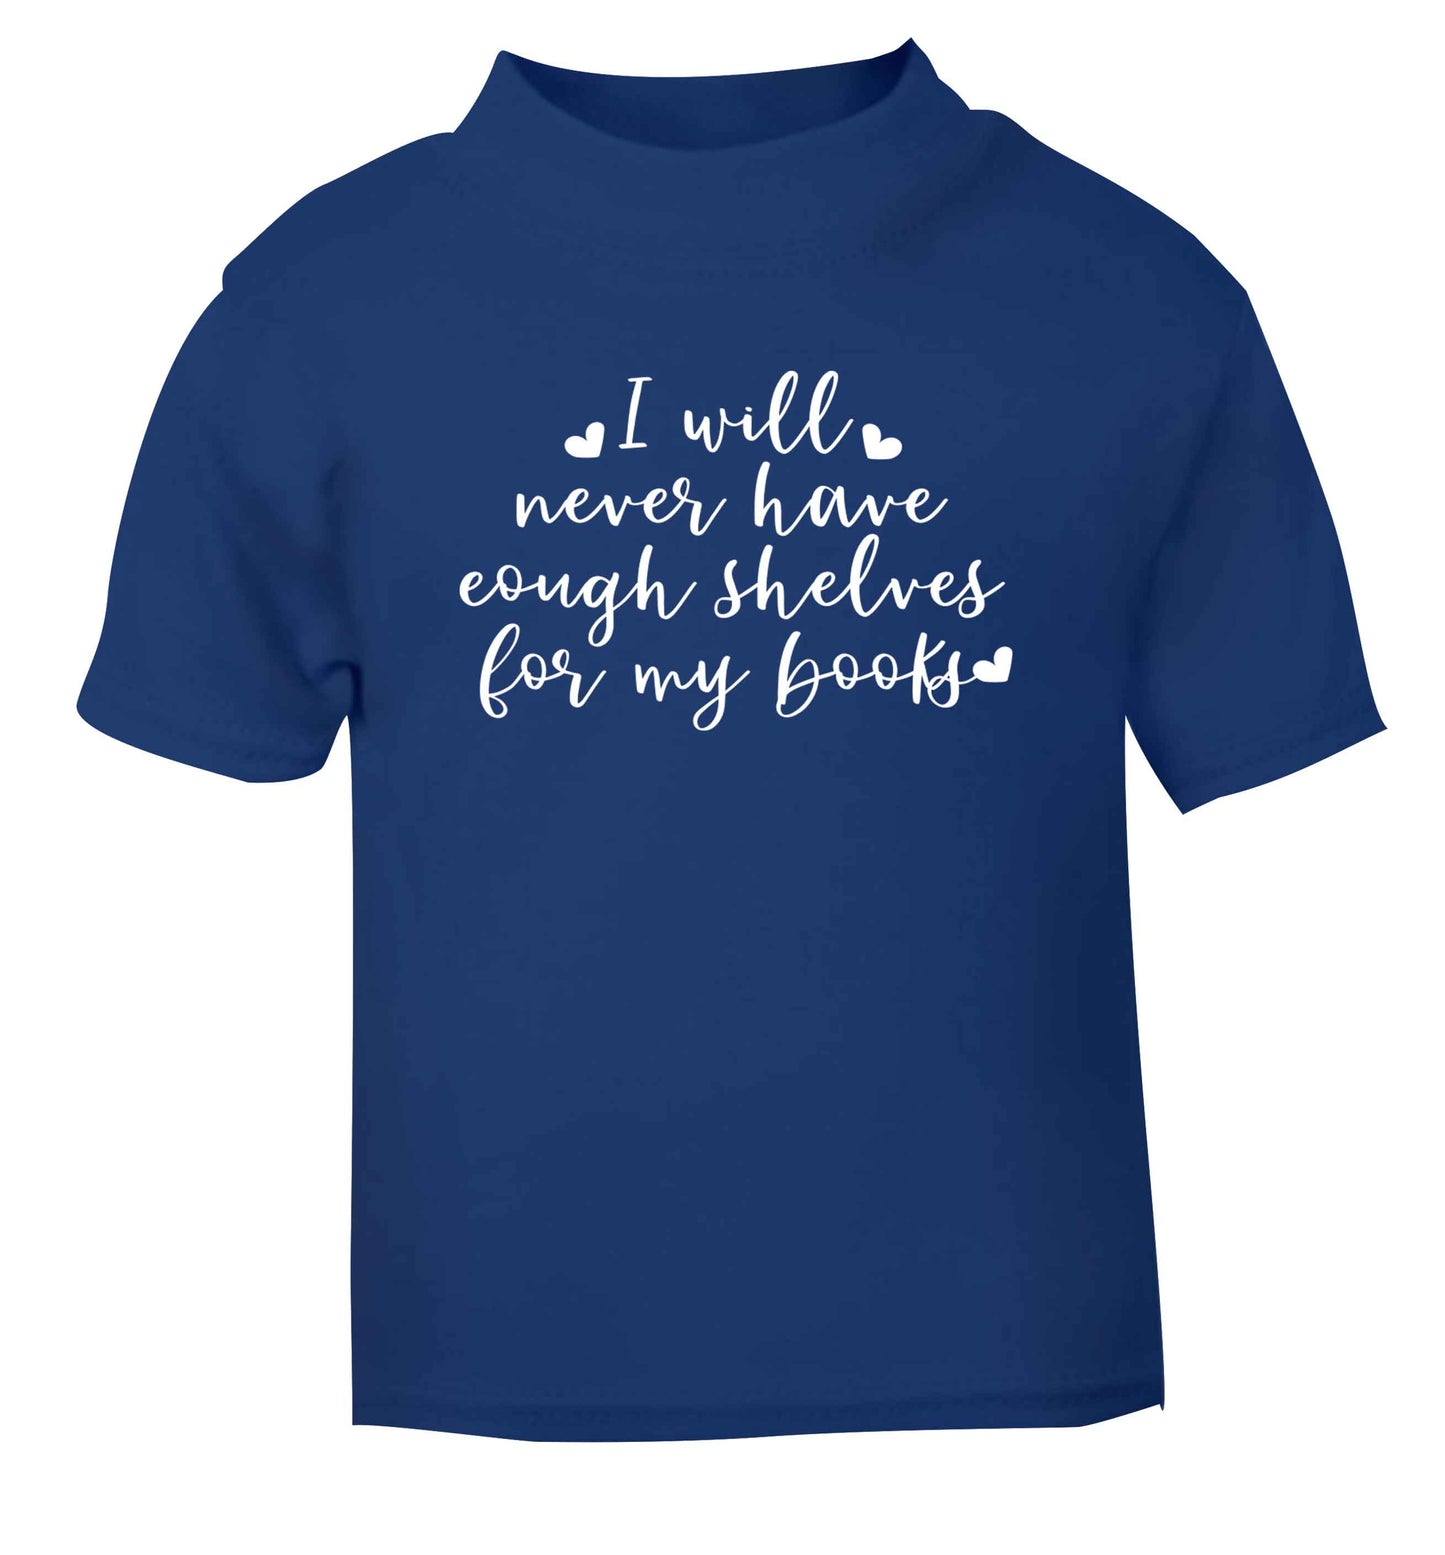 I will never have enough shelves for my books blue Baby Toddler Tshirt 2 Years